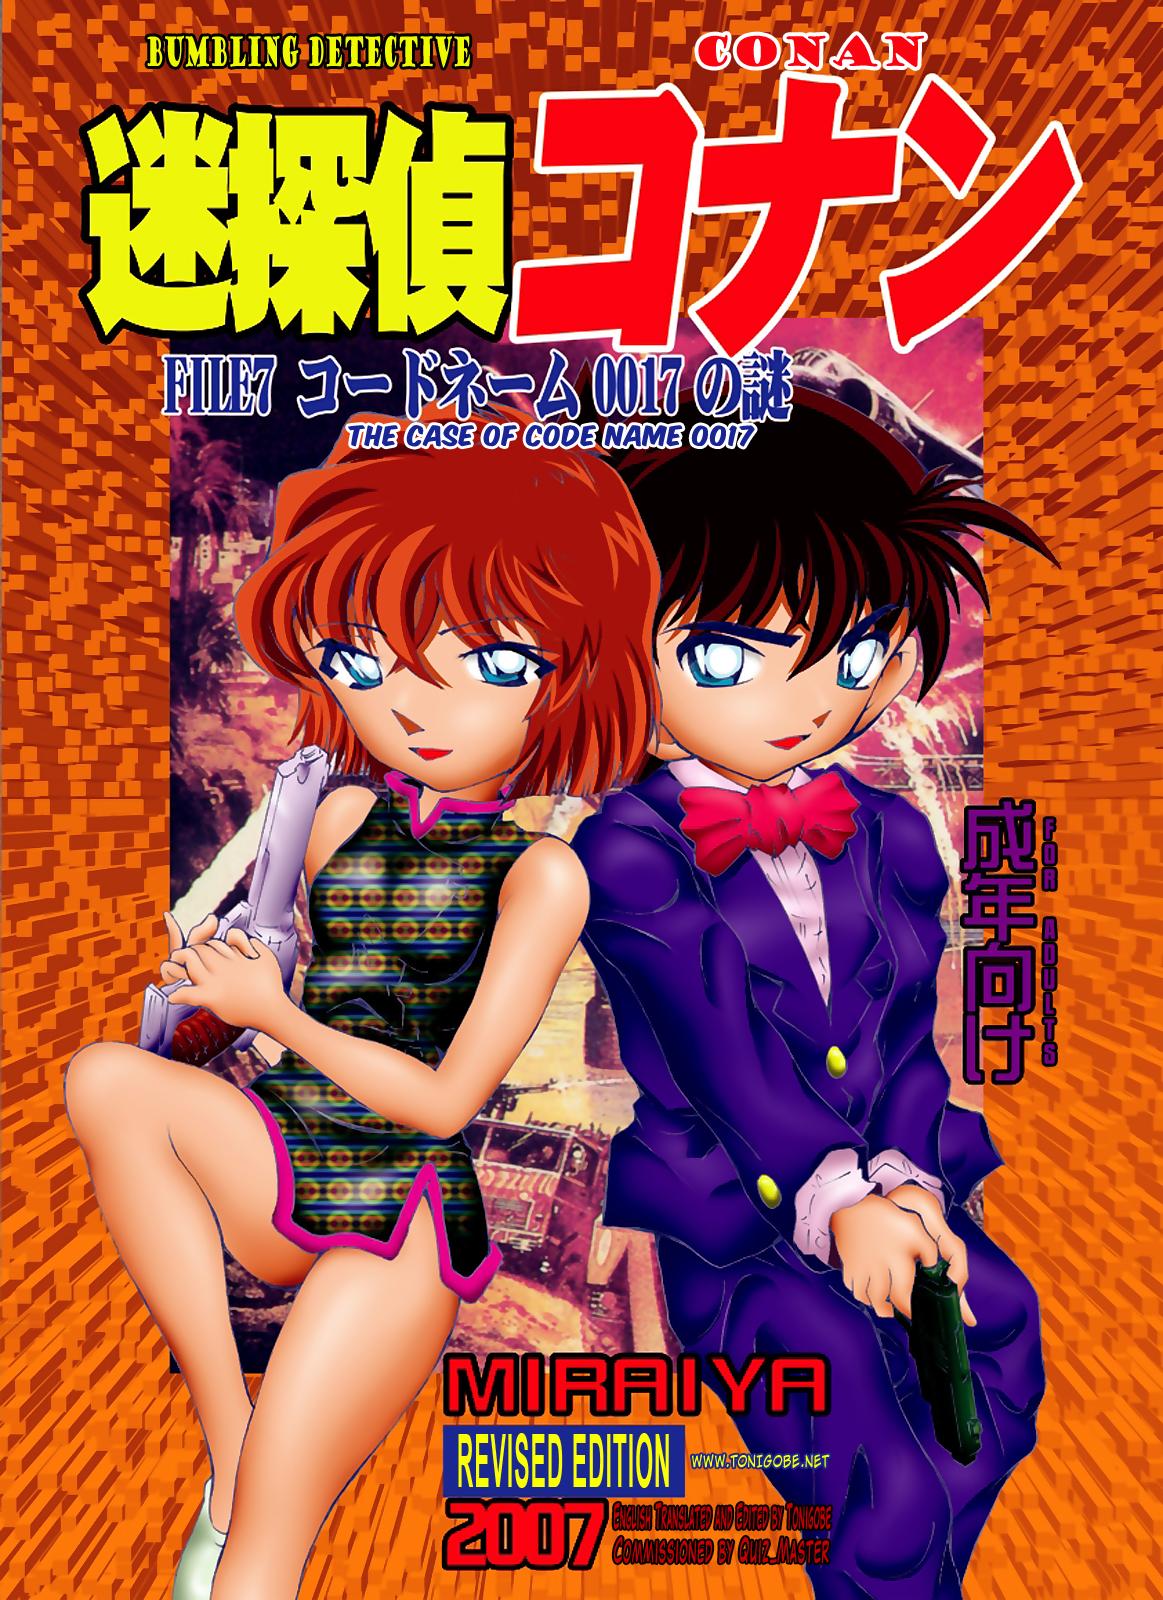 Home Bumbling Detective Conan - File 7: The Case of Code Name 0017 - Detective conan Cash - Picture 1